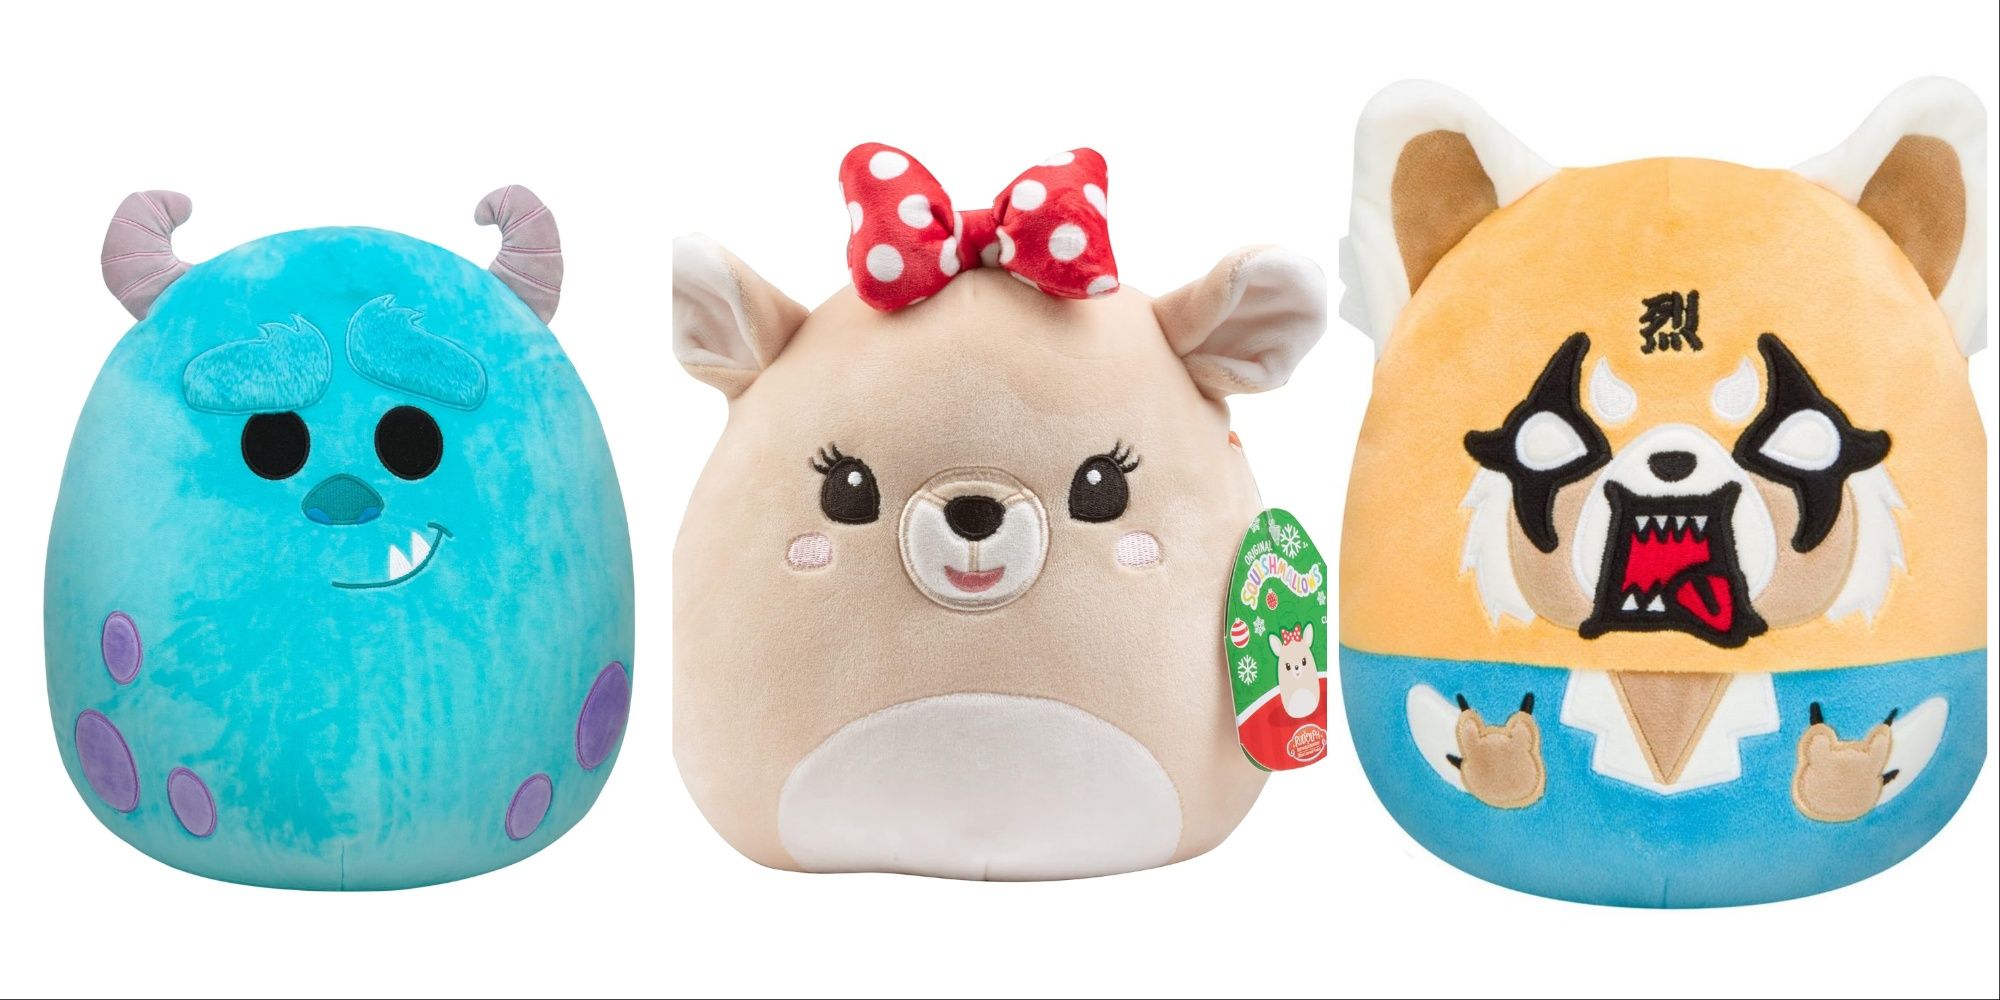 Three Squishmallows arranged in a line. From left to right, Sulley from Monsters Inc., Clarice the Reindeer, and the raging Aggretsuko plush.